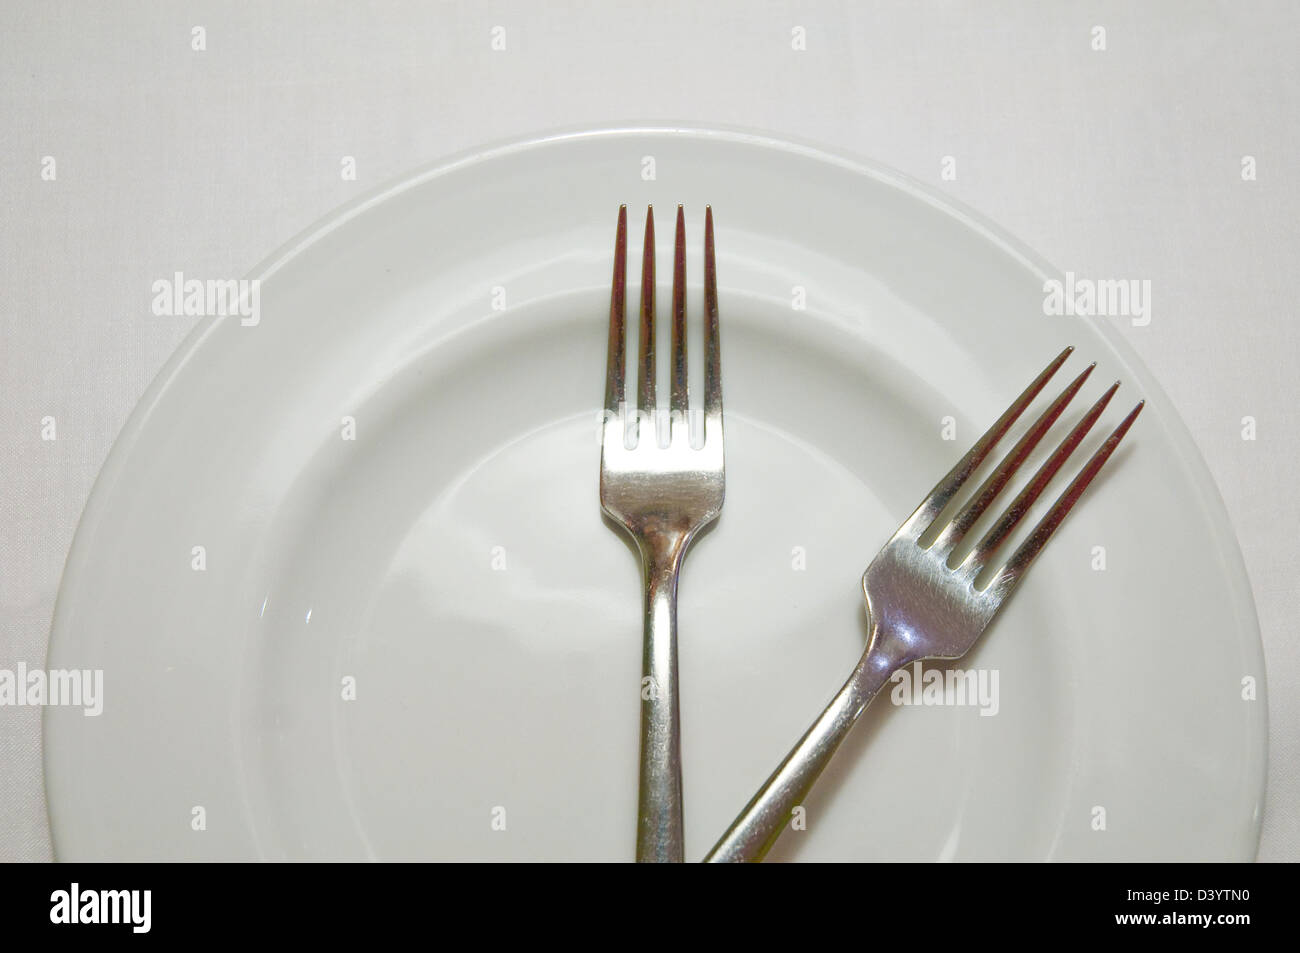 Two forks striking two o'clock on a plate. Stock Photo